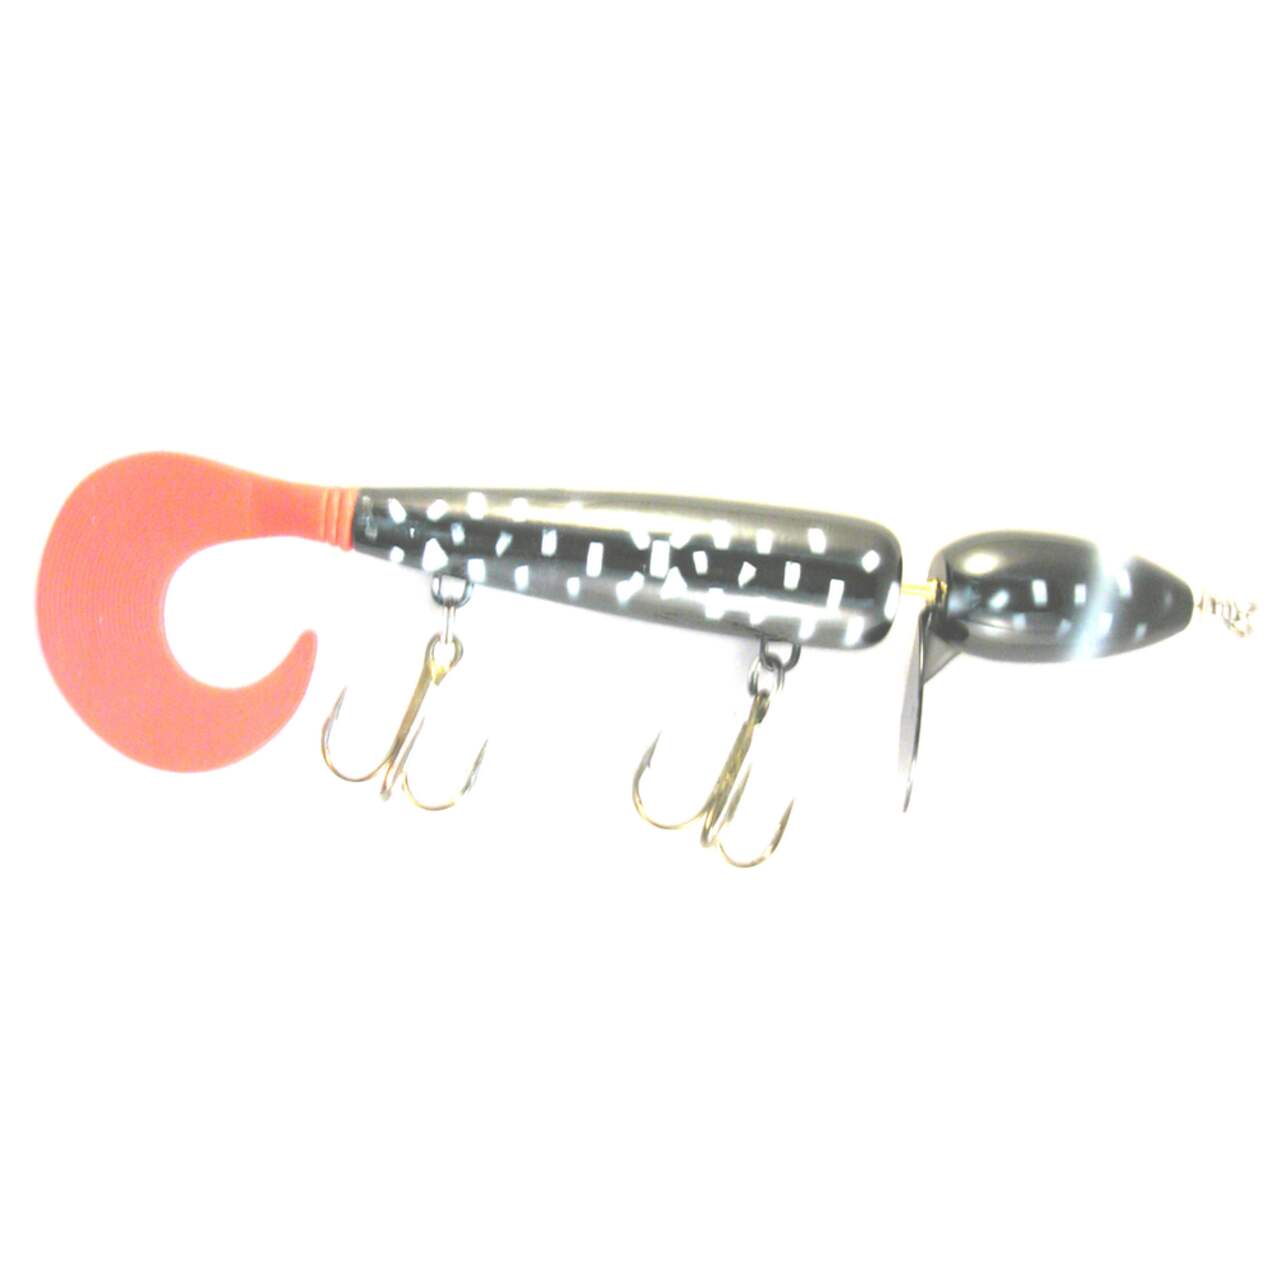 Savage Gear 3D Smash Tail Bait, 3-3/4-in